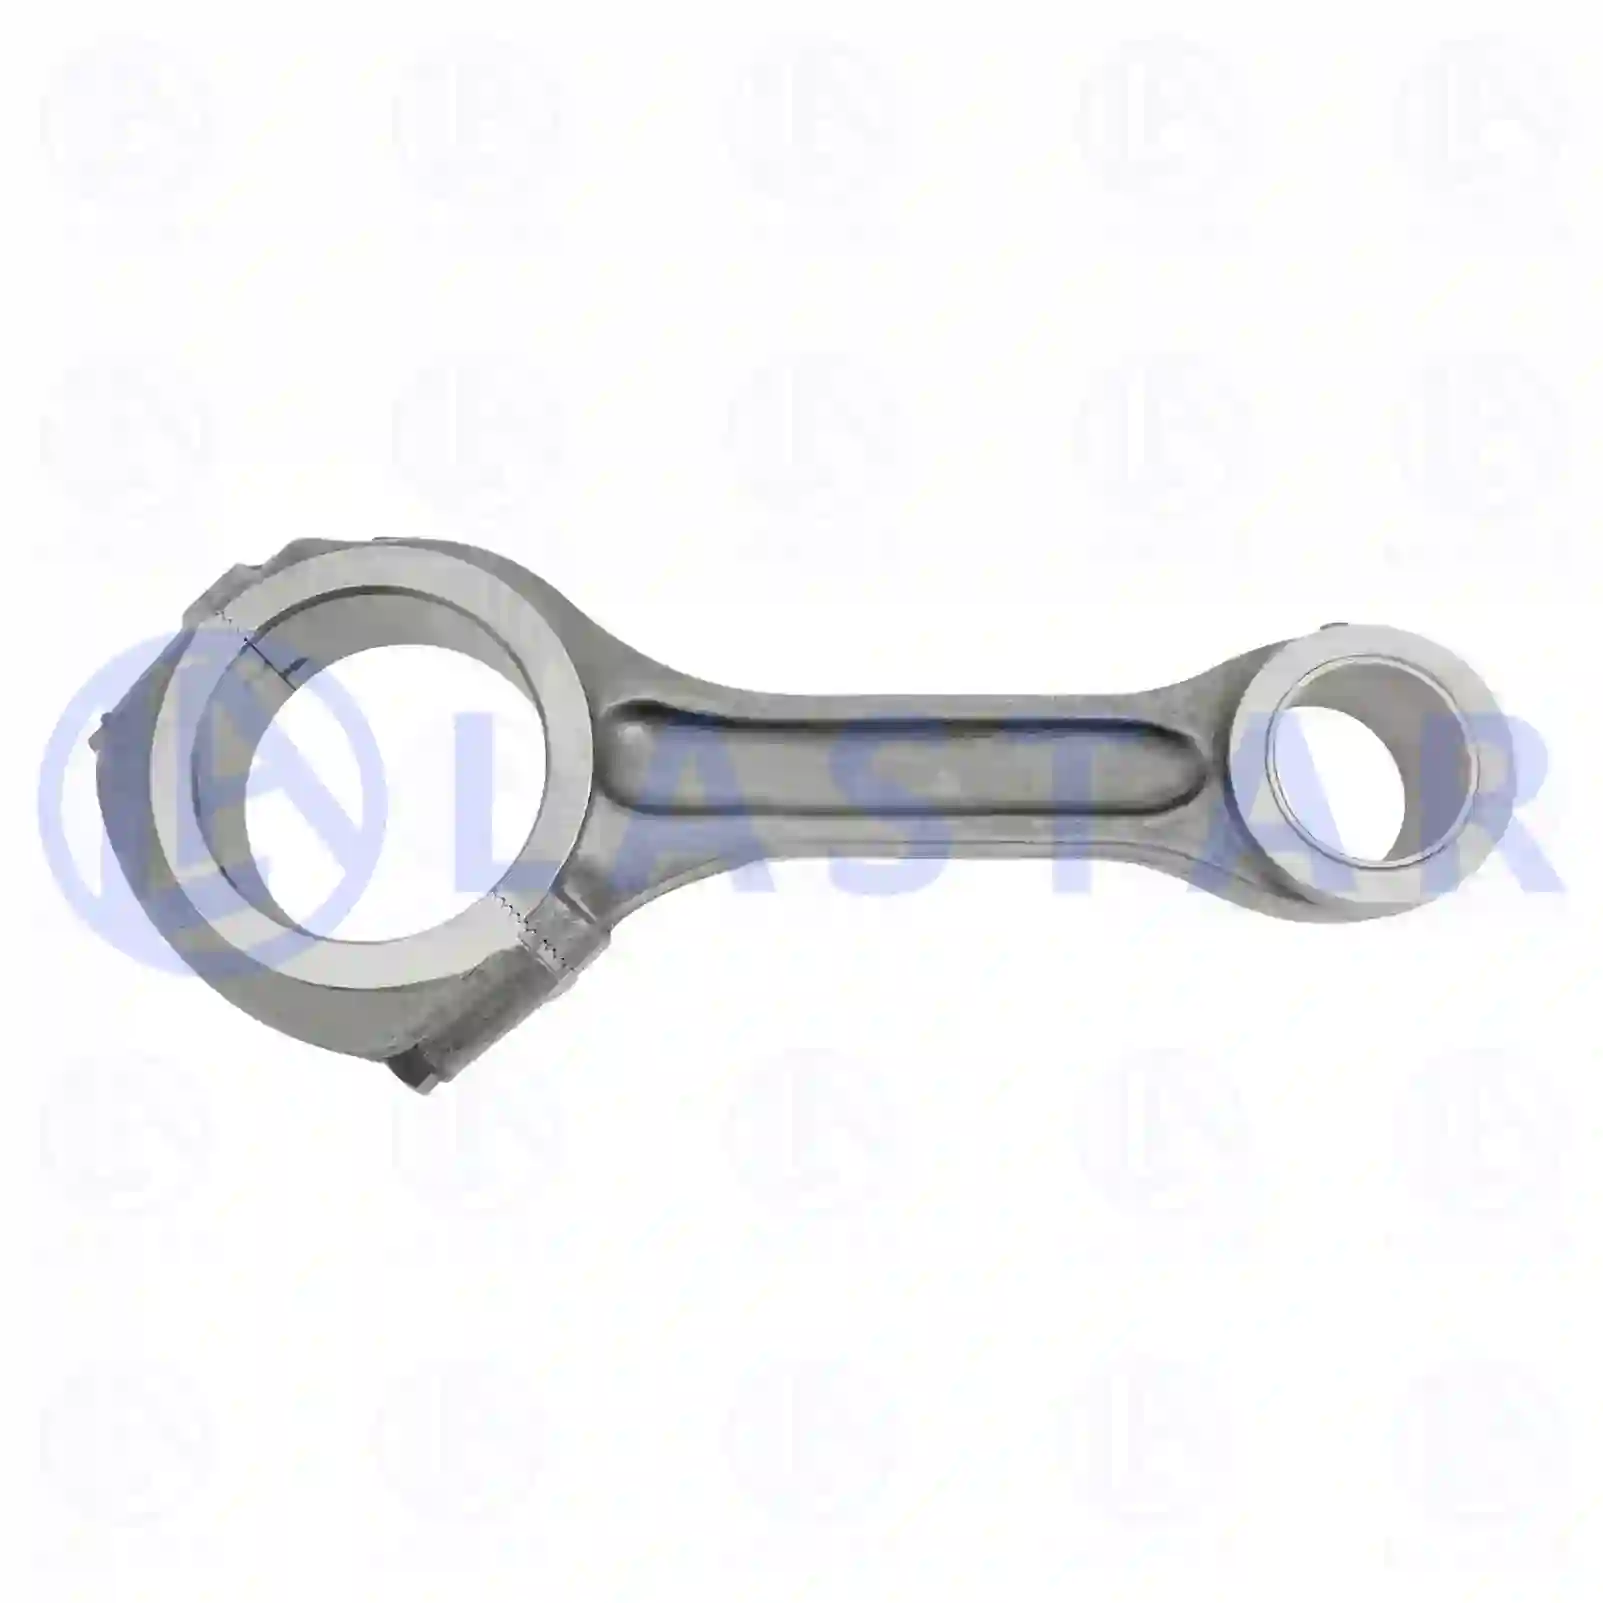 Connecting rod, straight head, 77702305, 470424, , ||  77702305 Lastar Spare Part | Truck Spare Parts, Auotomotive Spare Parts Connecting rod, straight head, 77702305, 470424, , ||  77702305 Lastar Spare Part | Truck Spare Parts, Auotomotive Spare Parts